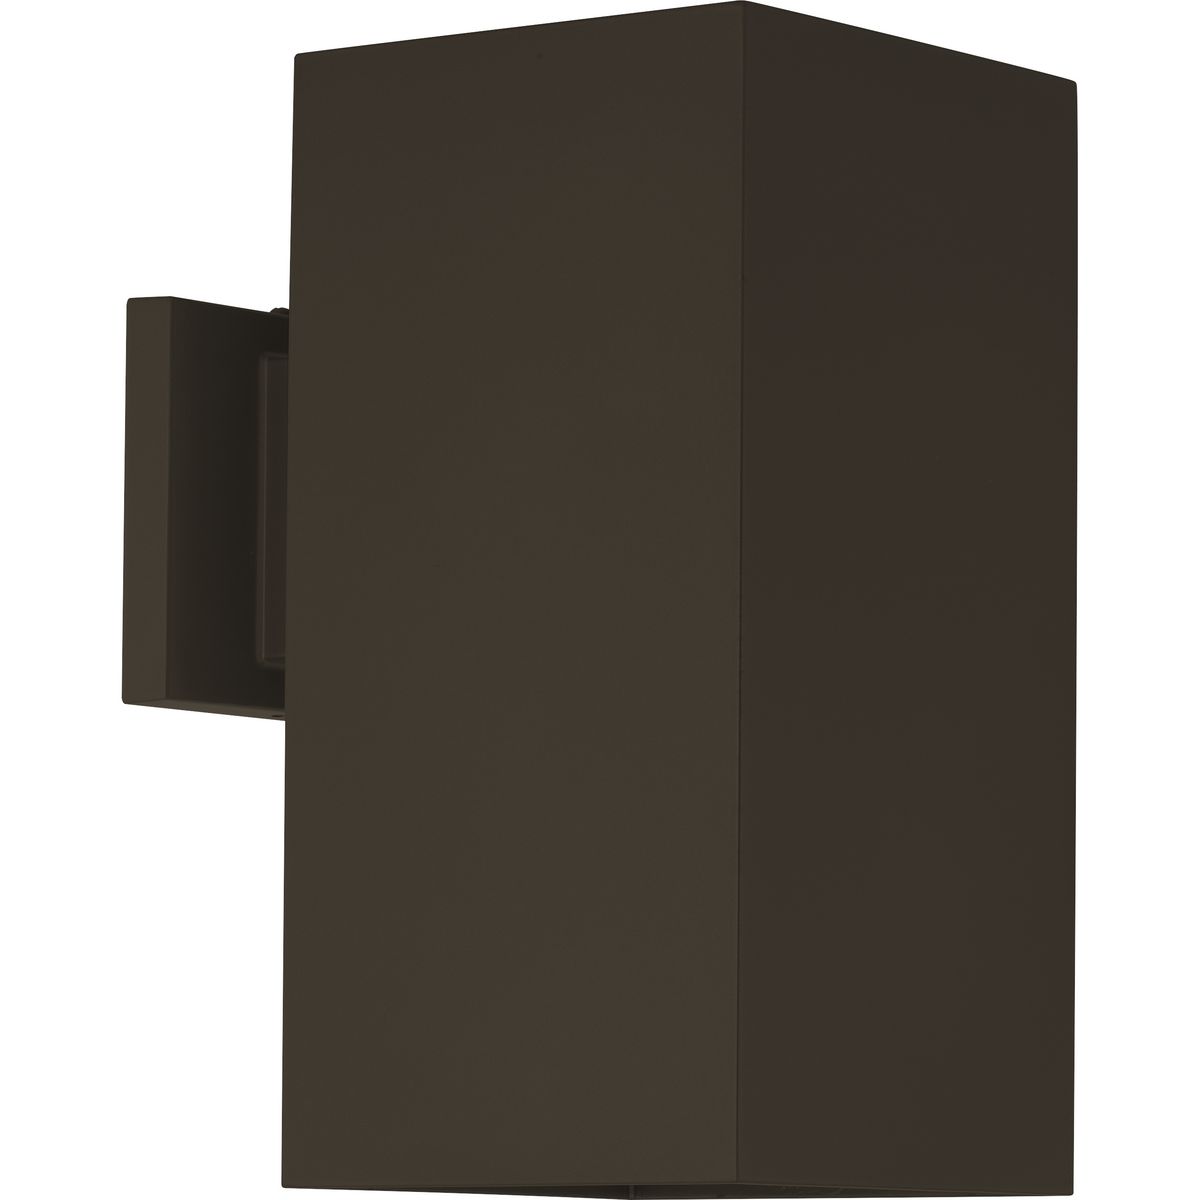 Square Outdoor Wall Light